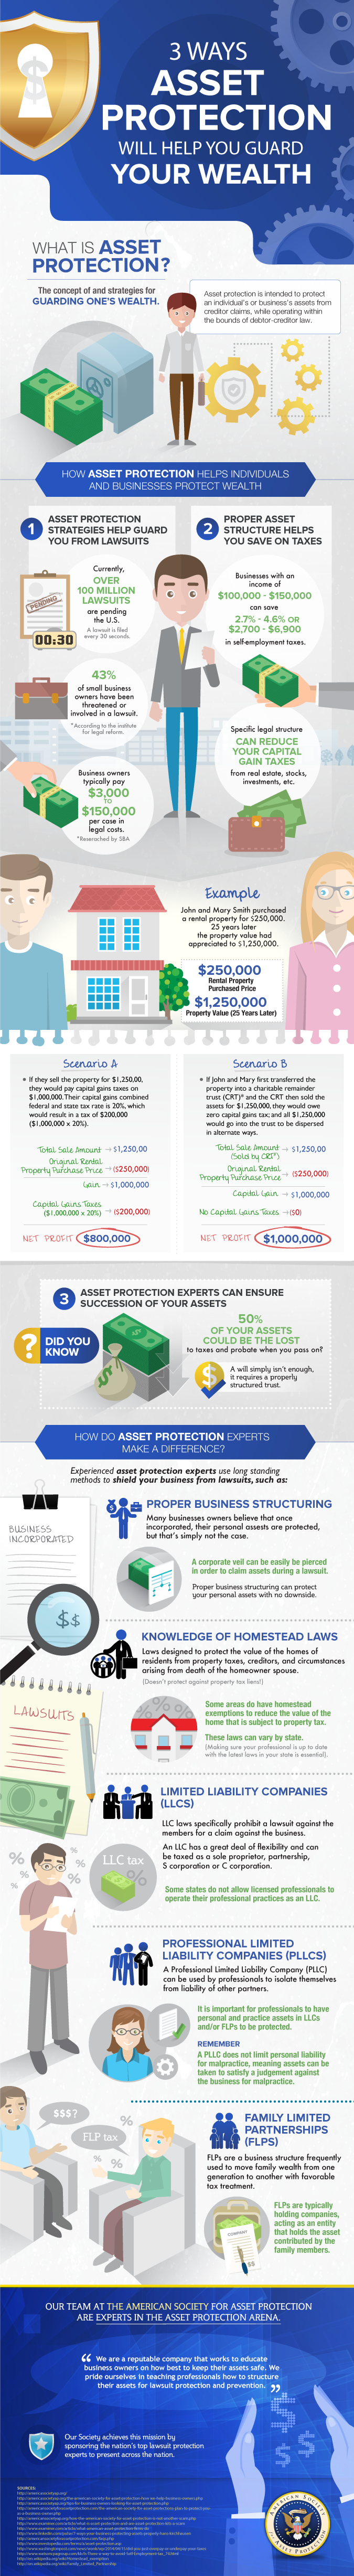 Asset Protection will help you